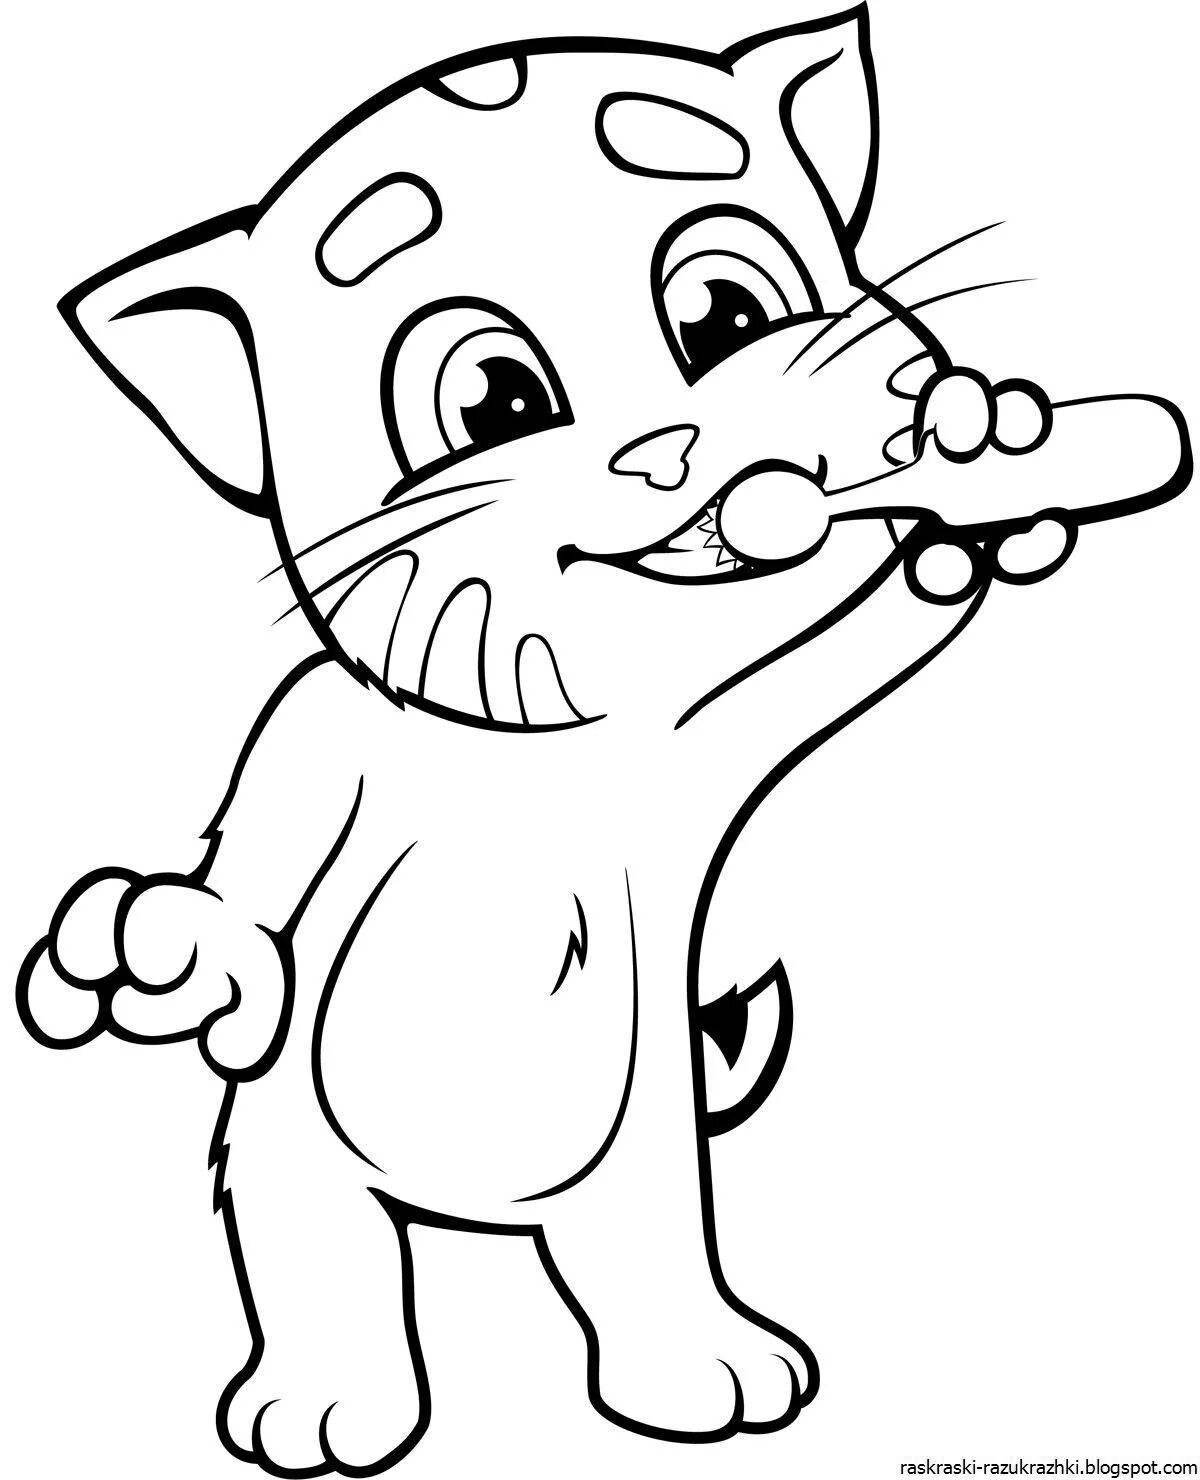 Fluffy kittens coloring book for kids 6-7 years old